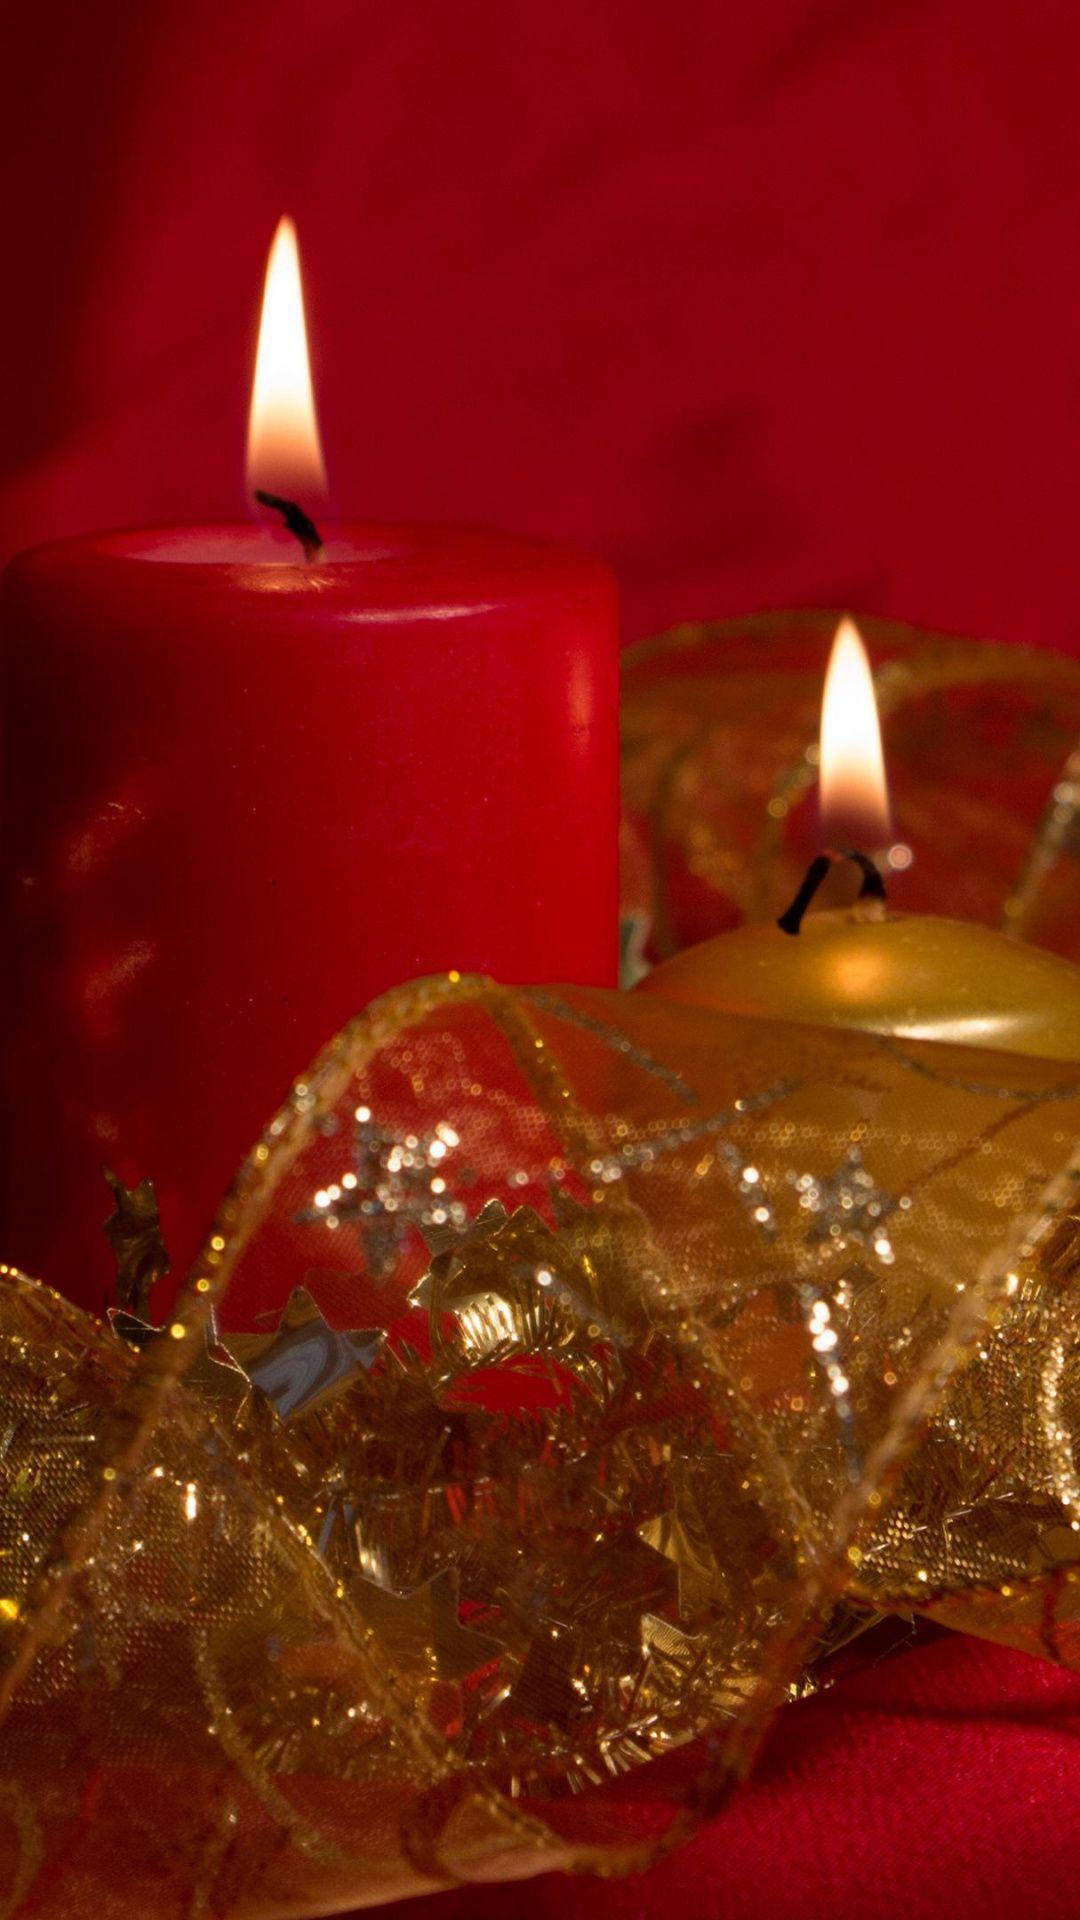 Wallpaper red, Christmas Day, interieur, still life, candle